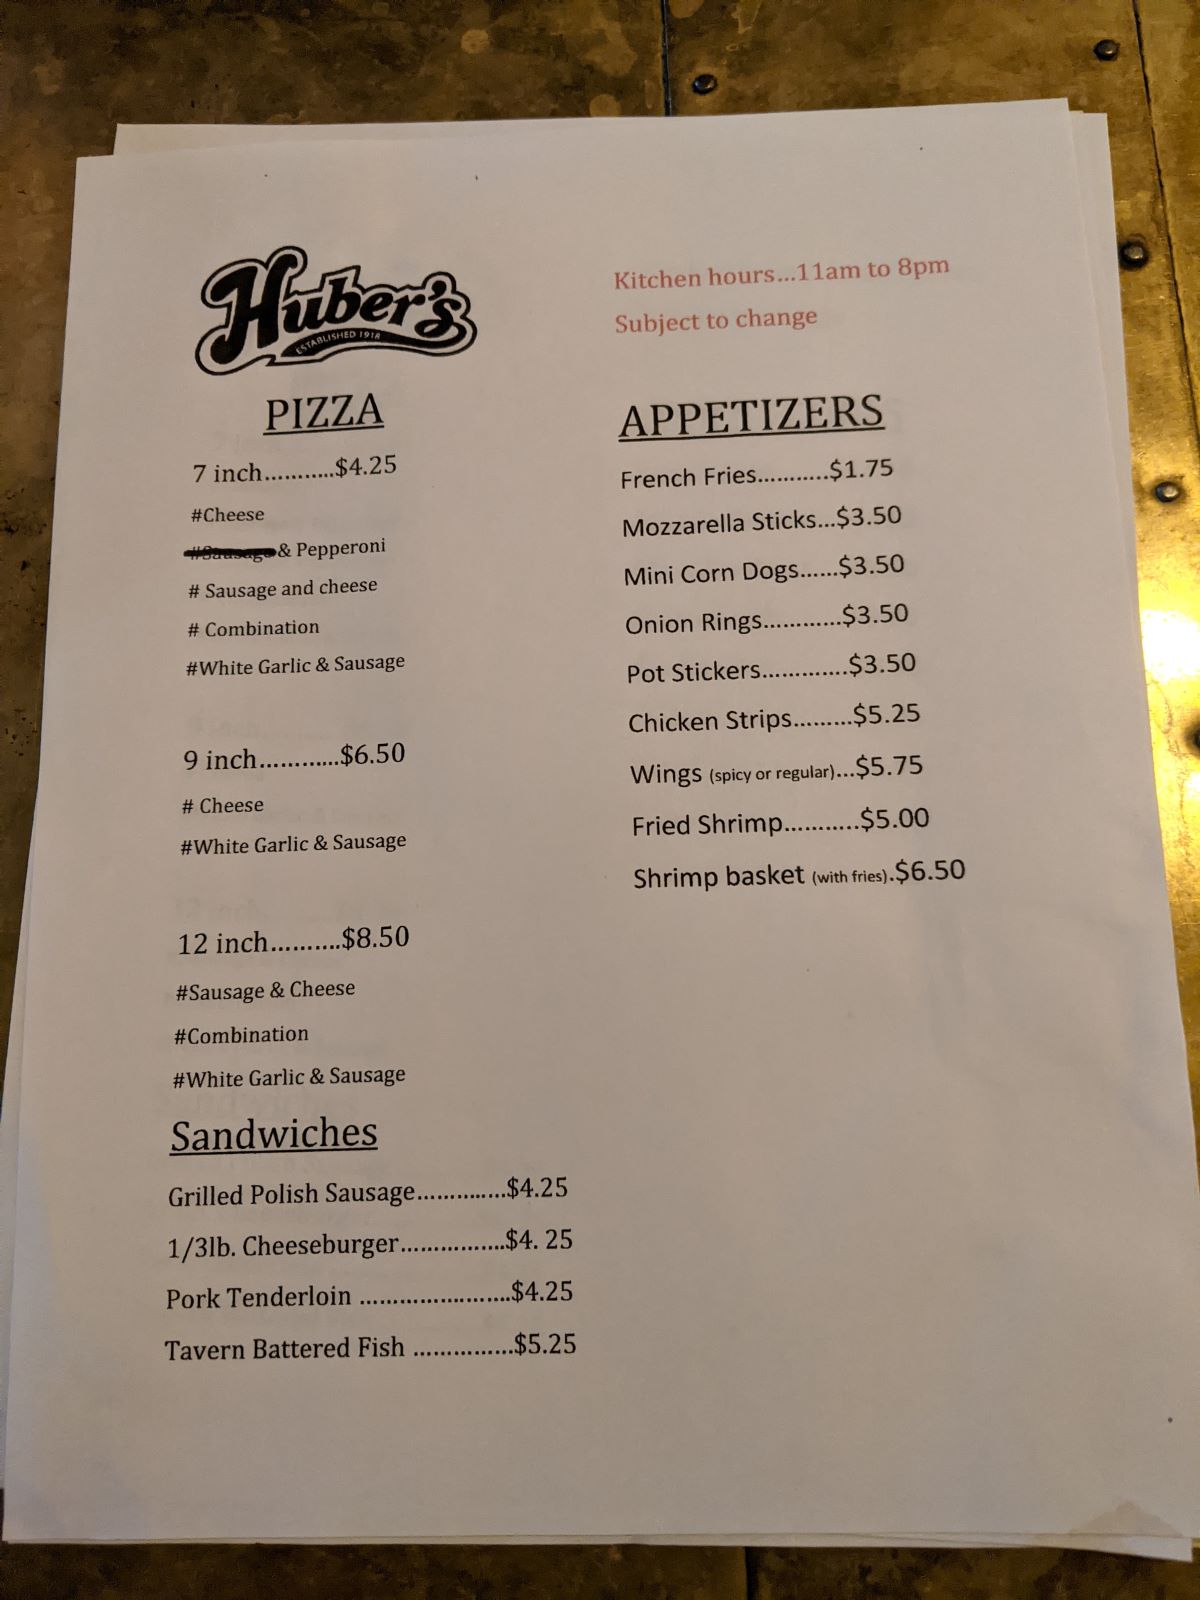 A paper menu of food offerings and their prices, including pizza, sandwiches, and appetizers.  Kitchen hours are listed in red at the top right hand corner of the menu. Photo by Tias Paul.